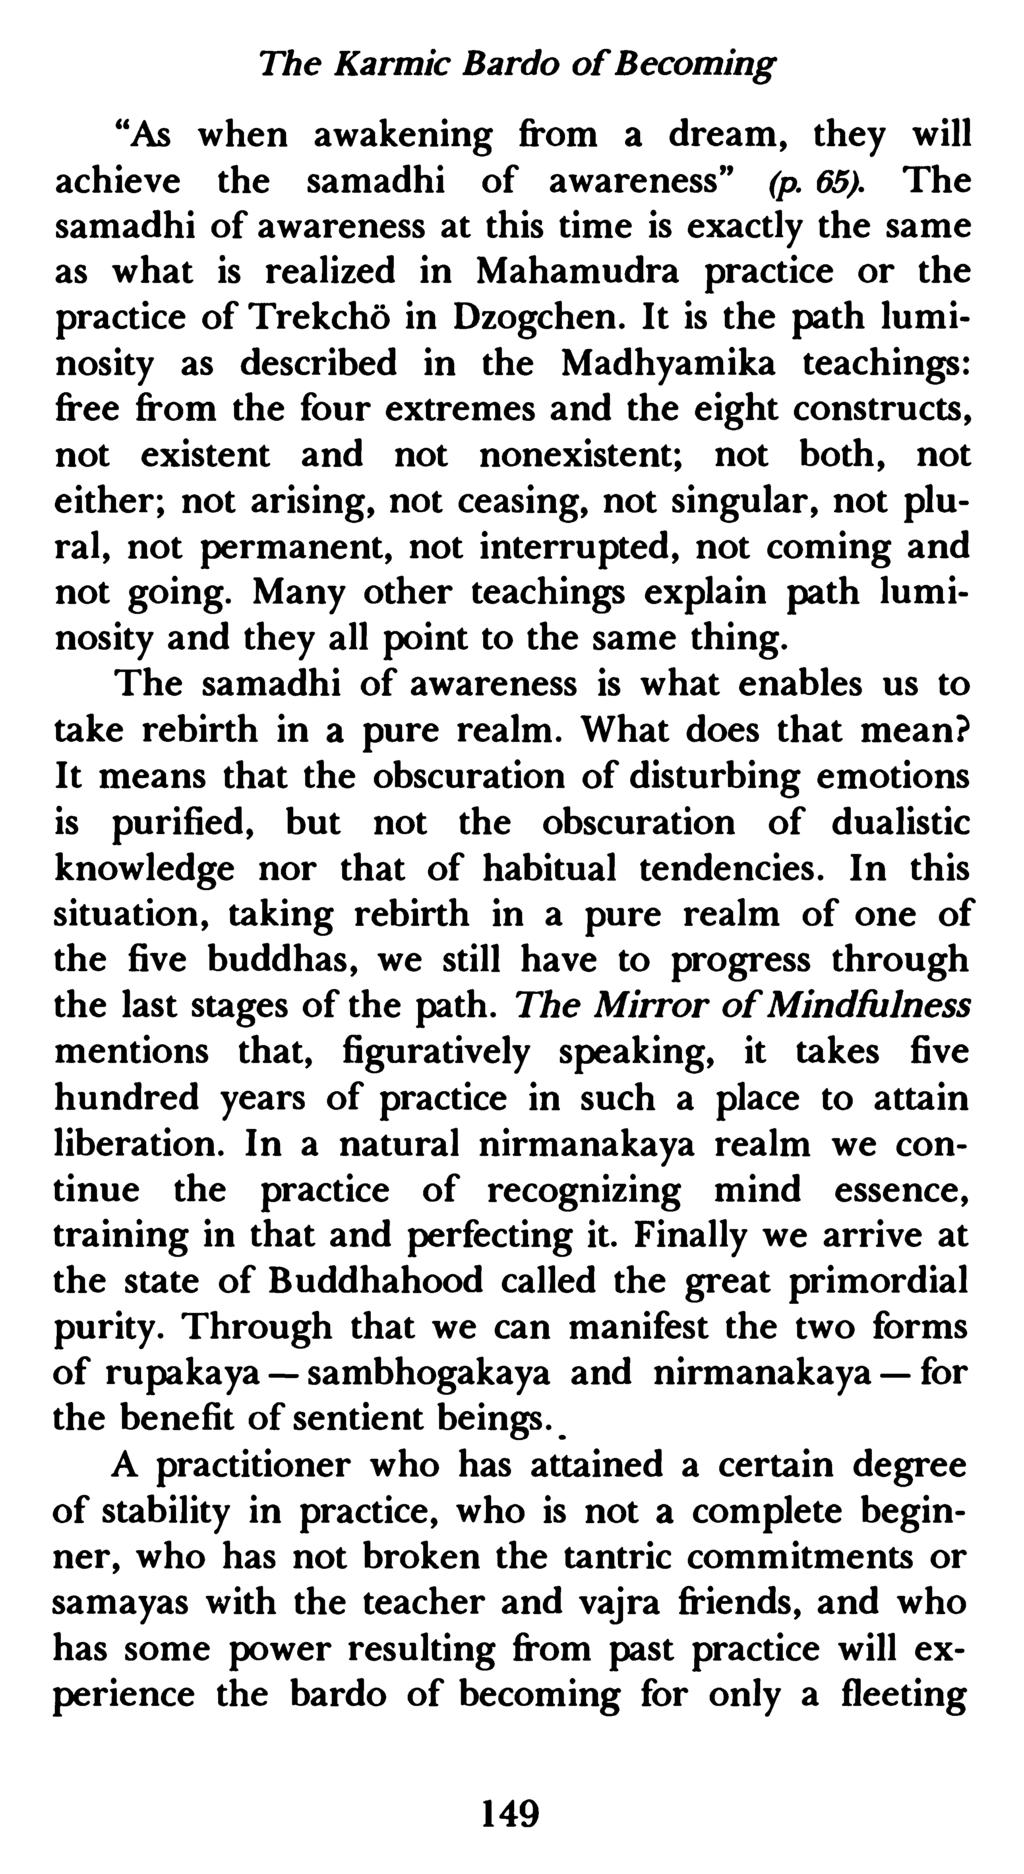 The Karmic Bardo of Becoming "As when awakening from a dream, they will achieve the samadhi of awareness" (p. 65).